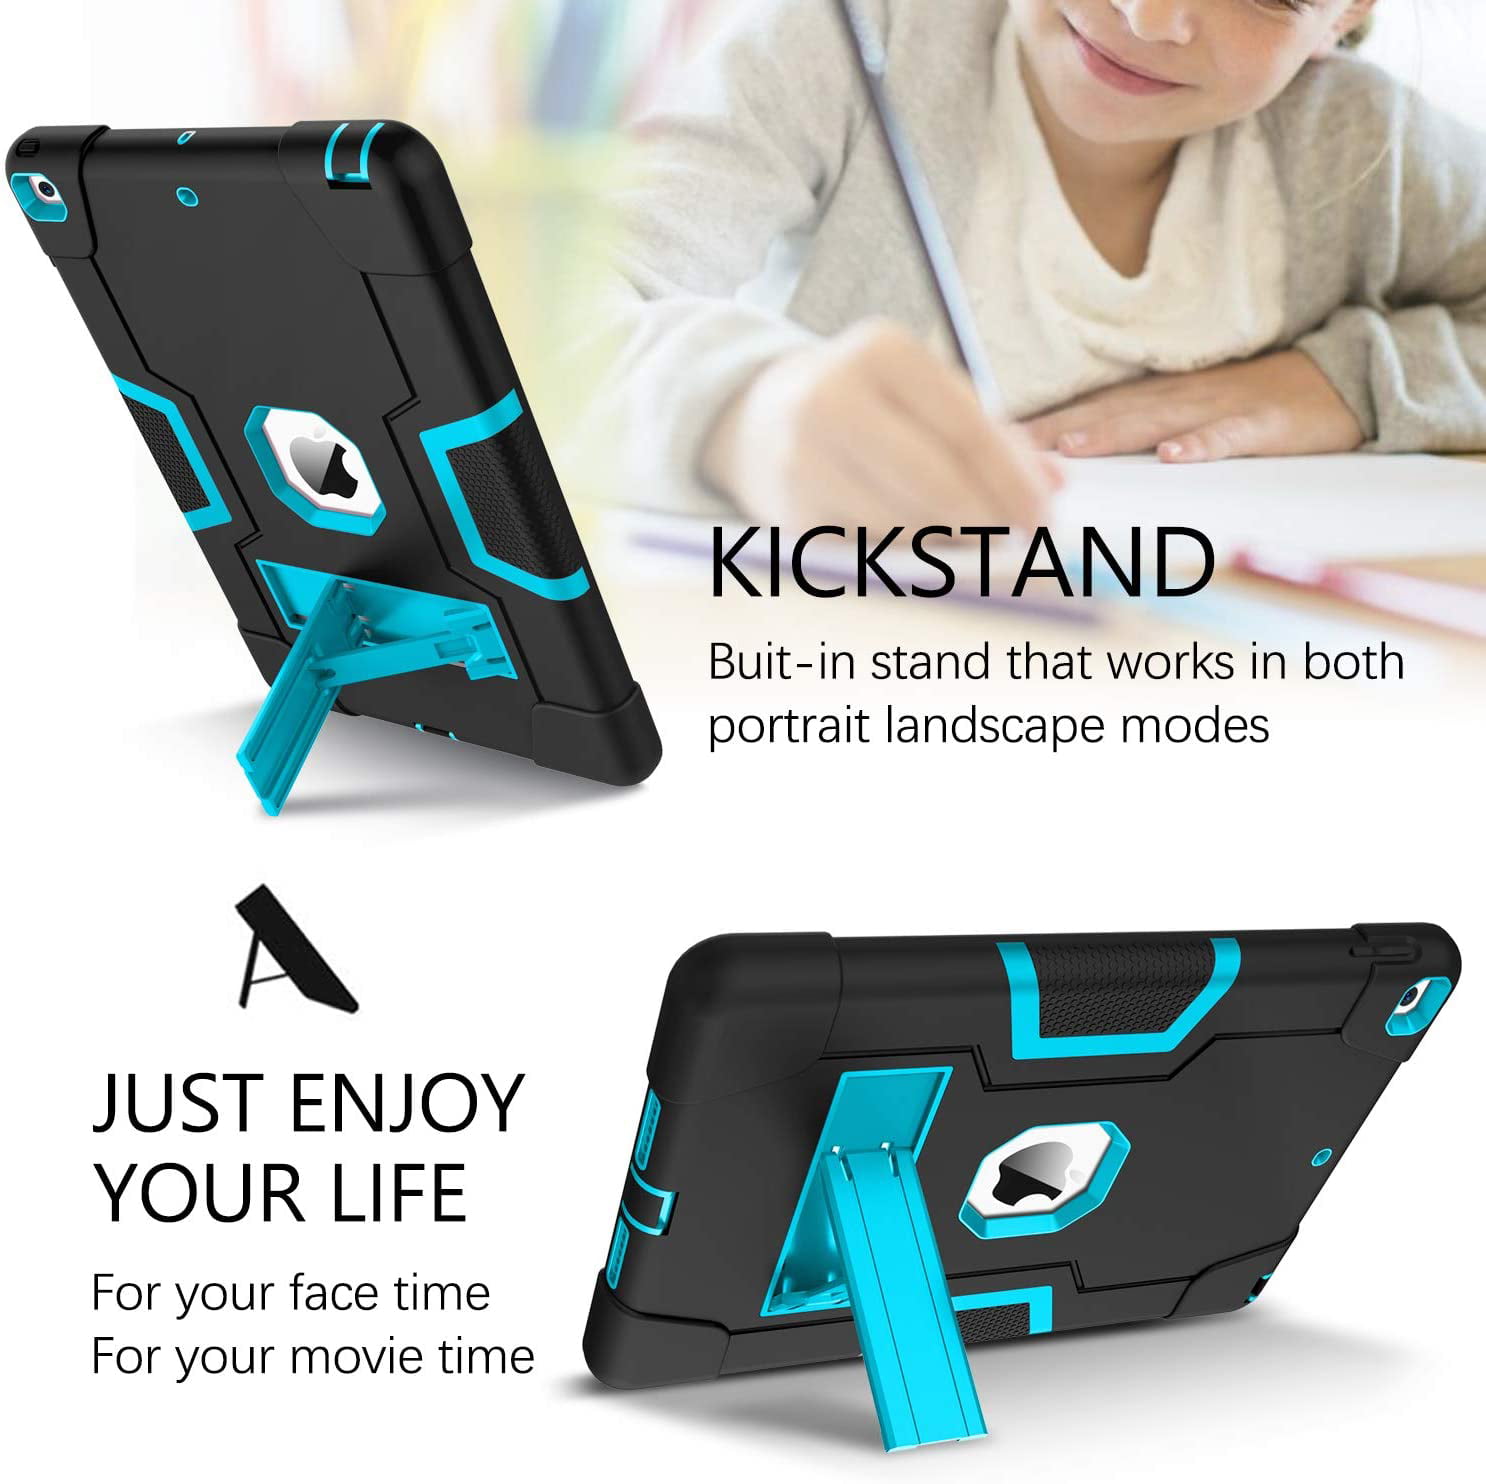 iPad 7th Generation Case iPad 10.2 2019 Case, Black ,Kickstand Heavy Duty 3 in 1 High Impact Full-Body Rugged Bumper Shockproof Protective Anti-Scratch Tablet Case for iPad 10.2 Inch 2019, Model No A2197/A2198/A2200